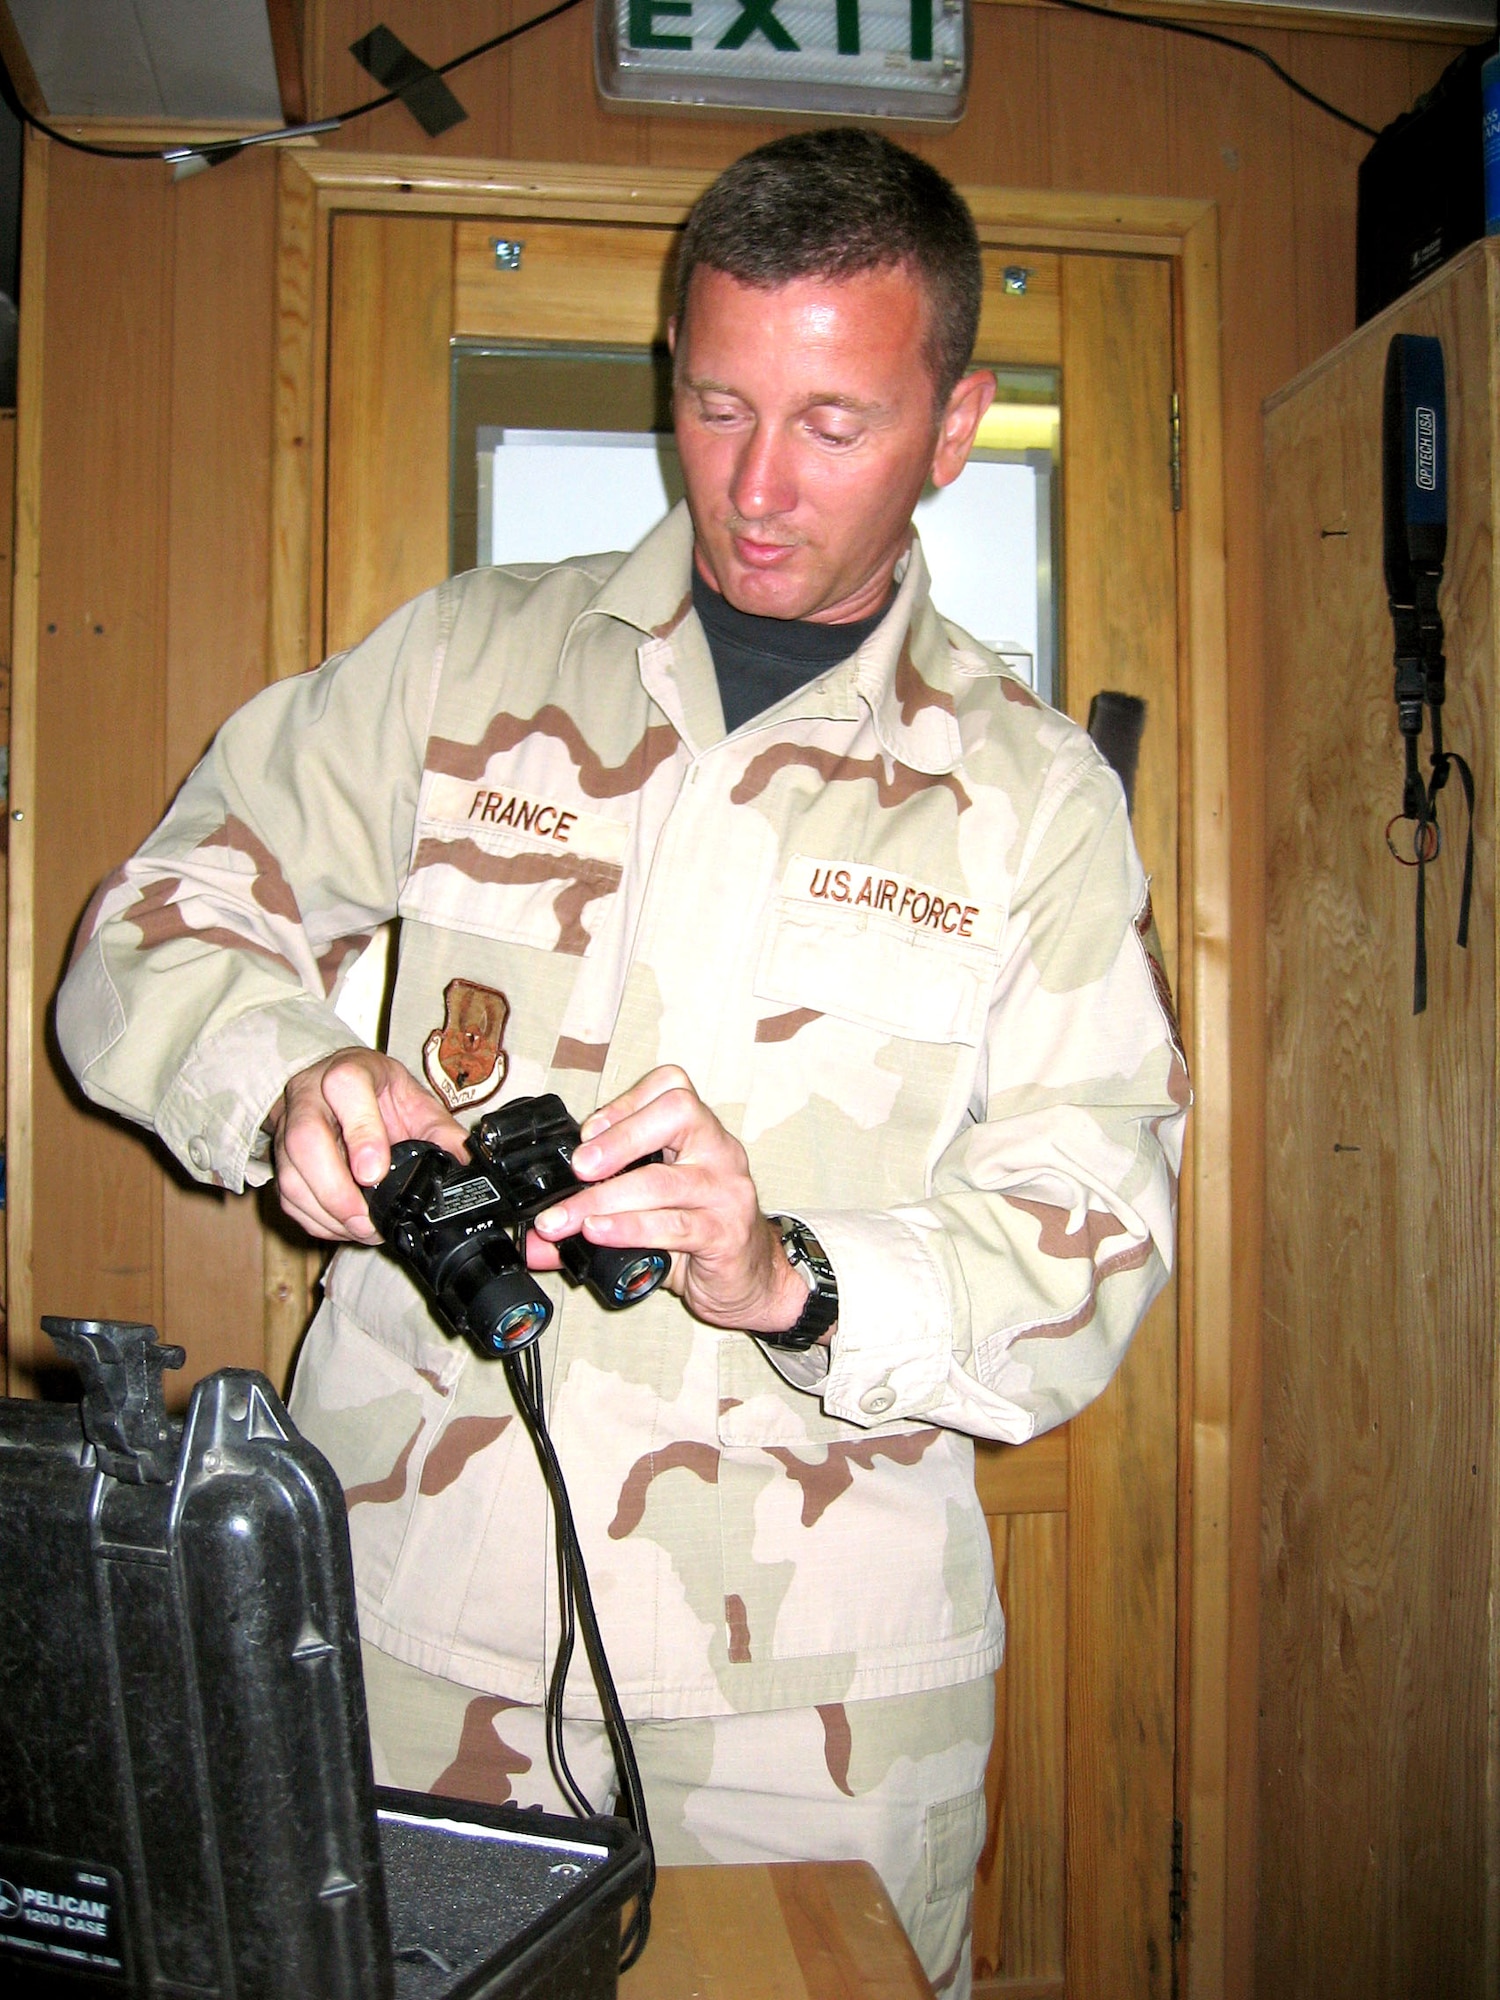 KARSHI-KHANABAD AIR BASE, Uzbekistan -- Master Sgt. Ray France inspects night-vision goggles after an aircrew returns.  He is an aircrew life support technician with the 774th Expeditionary Airlift Squadron and is deployed from Carswell Field, Texas.  (U.S. Air Force photo by Staff Sgt. Shad Eidson)